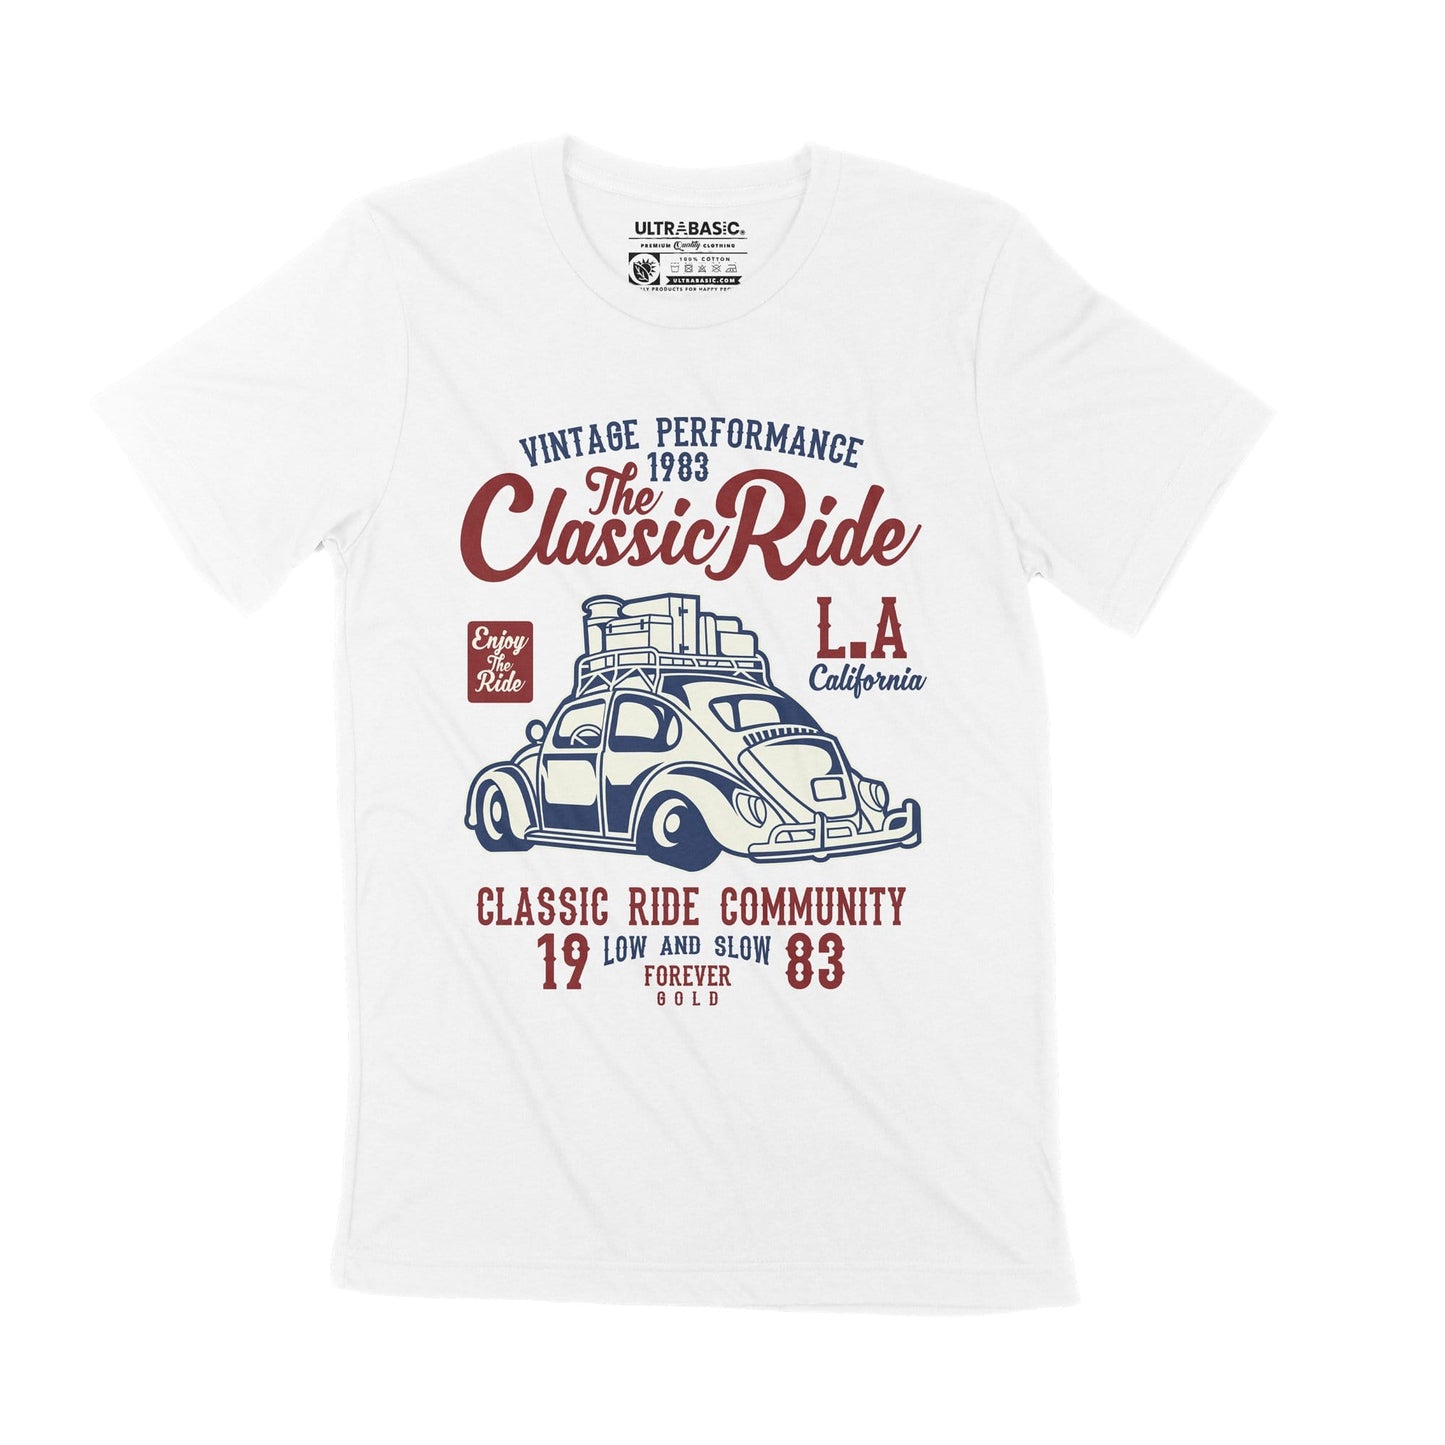 ULTRABASIC Men's Graphic T-Shirt Vintage Performance 1983 - The Classic Ride